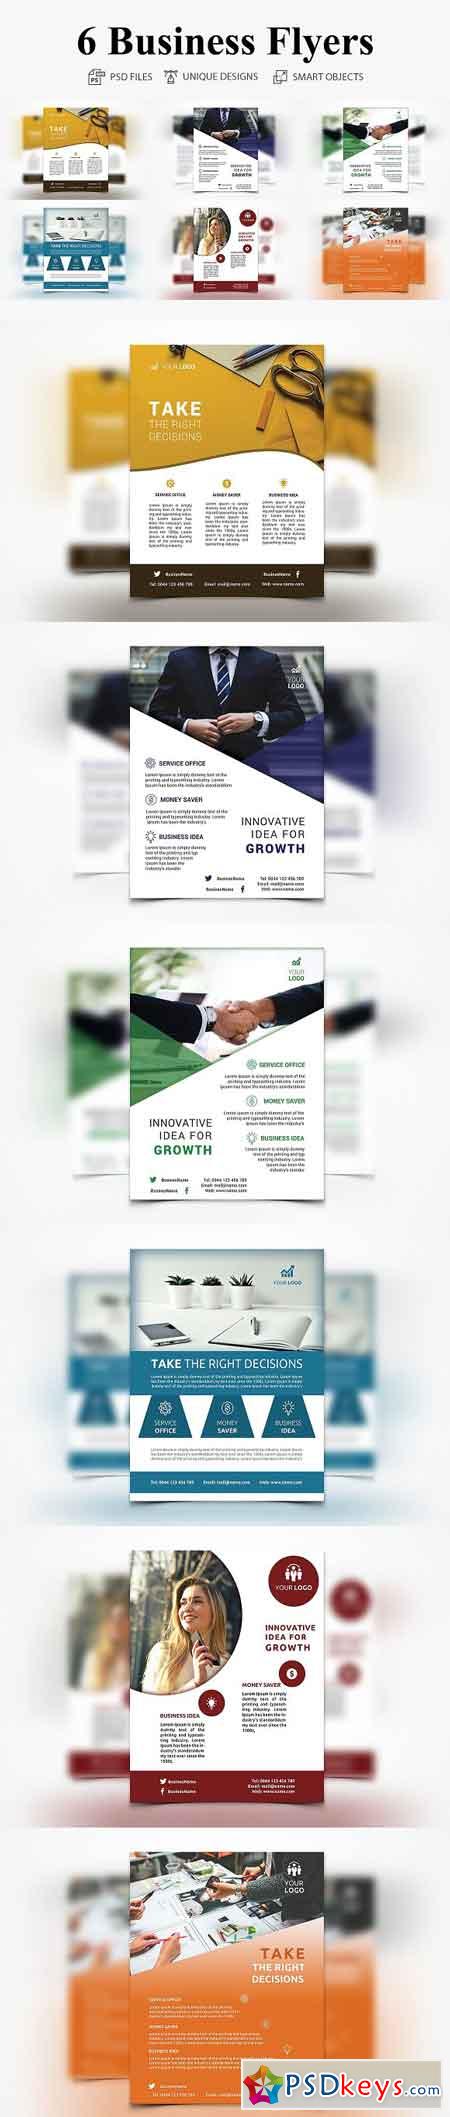 6 Business Flyers 2873269